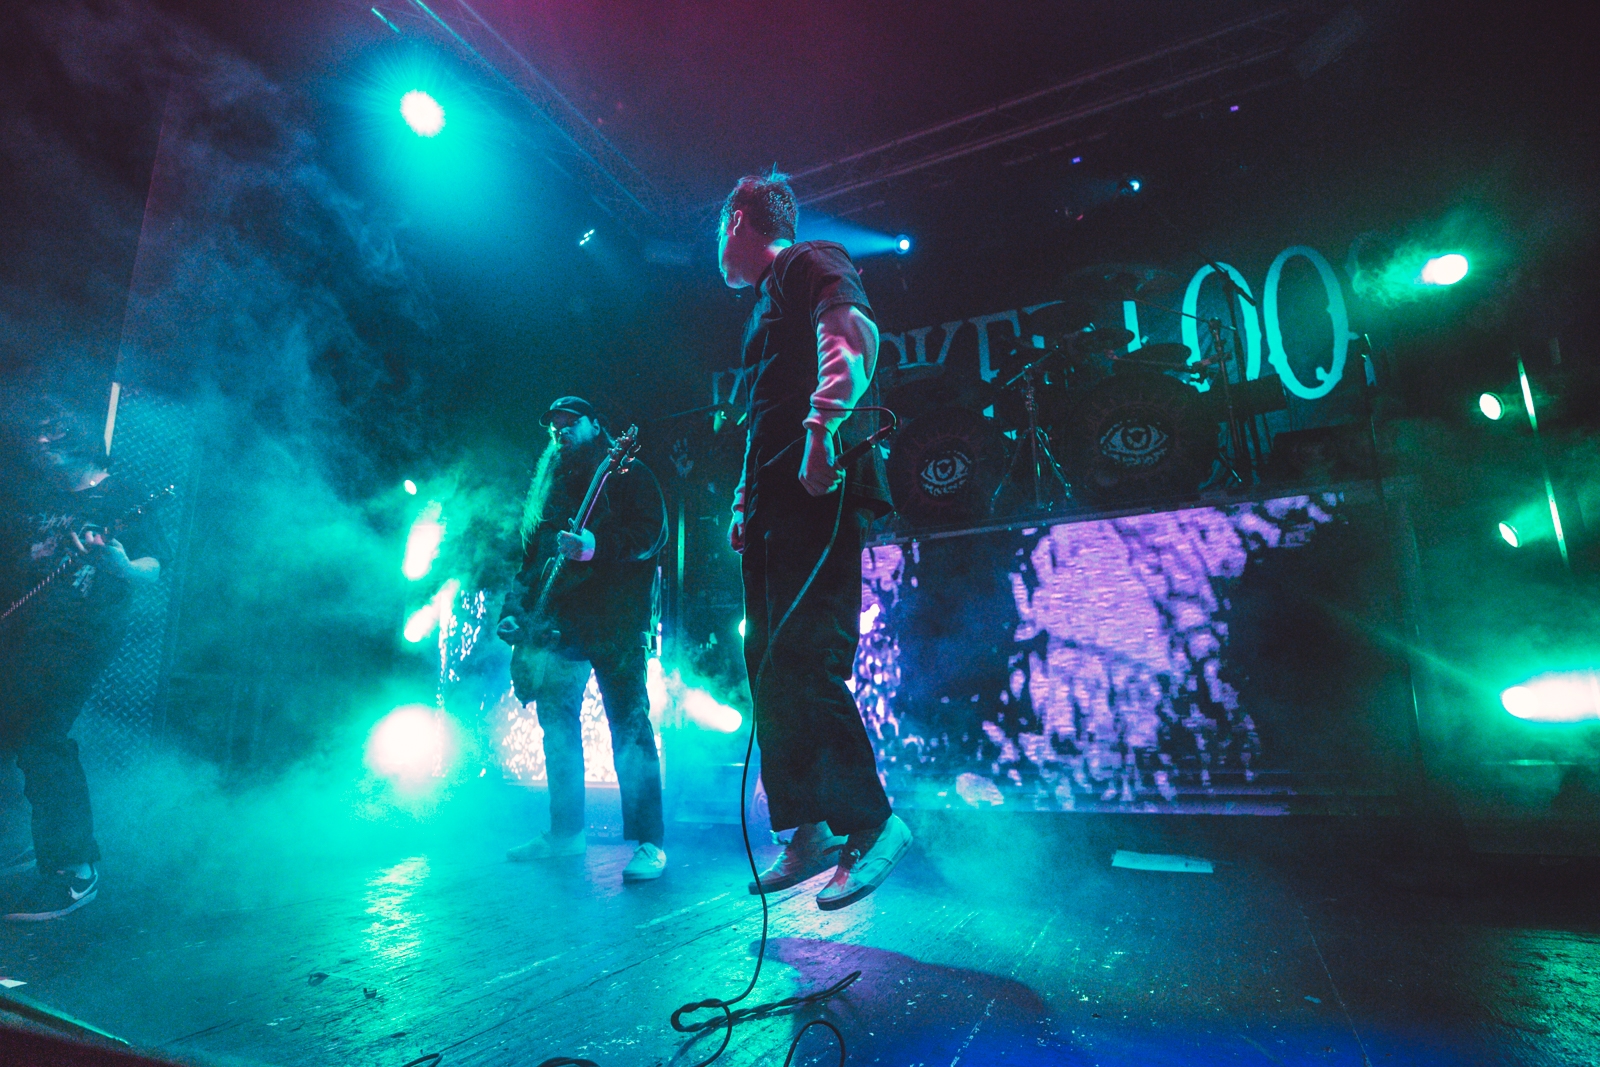 Gallery: ‘A Tear in The Fabric of Life’ Tour Featuring Knocked Loose, Movements, Kublai Khan TX, & Koyo – Joliet, IL – 4.2.22